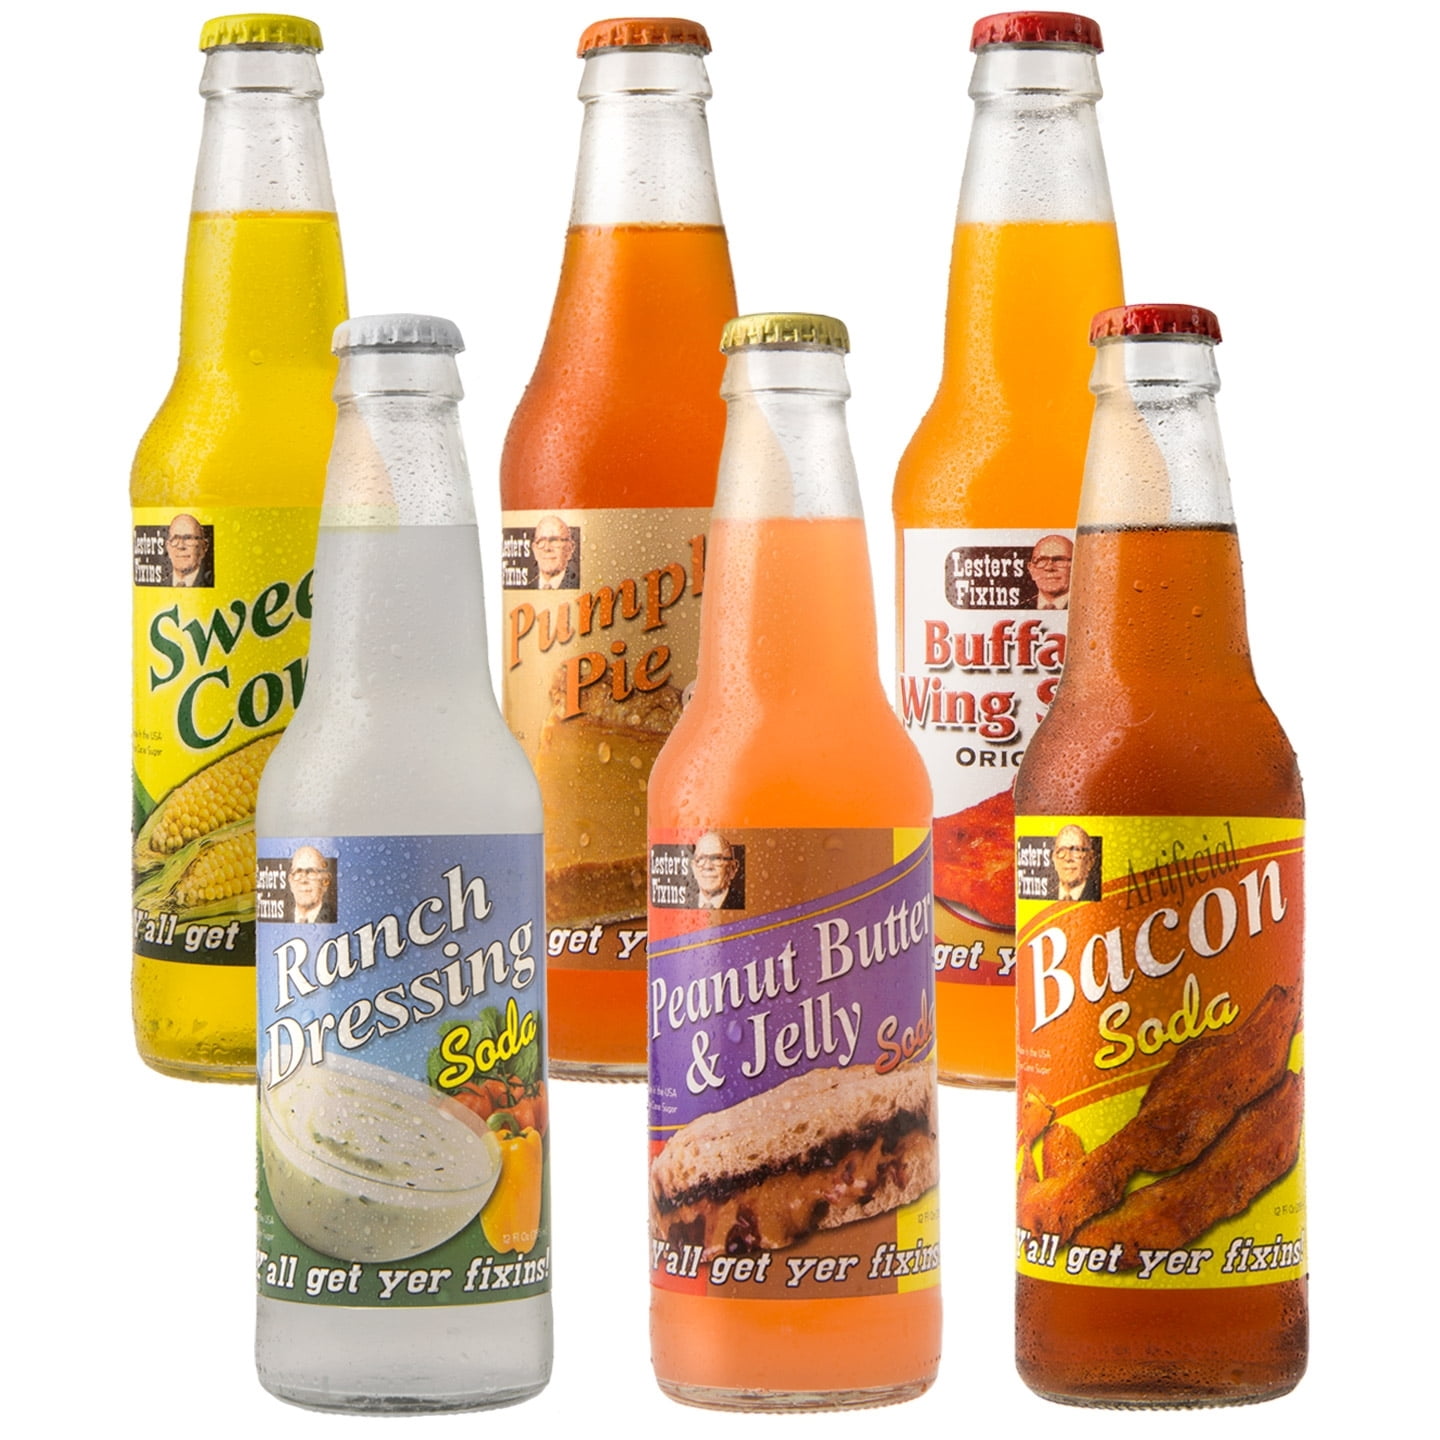 REVIEW: Lester's Fixins Ranch Dressing Soda - The Impulsive Buy